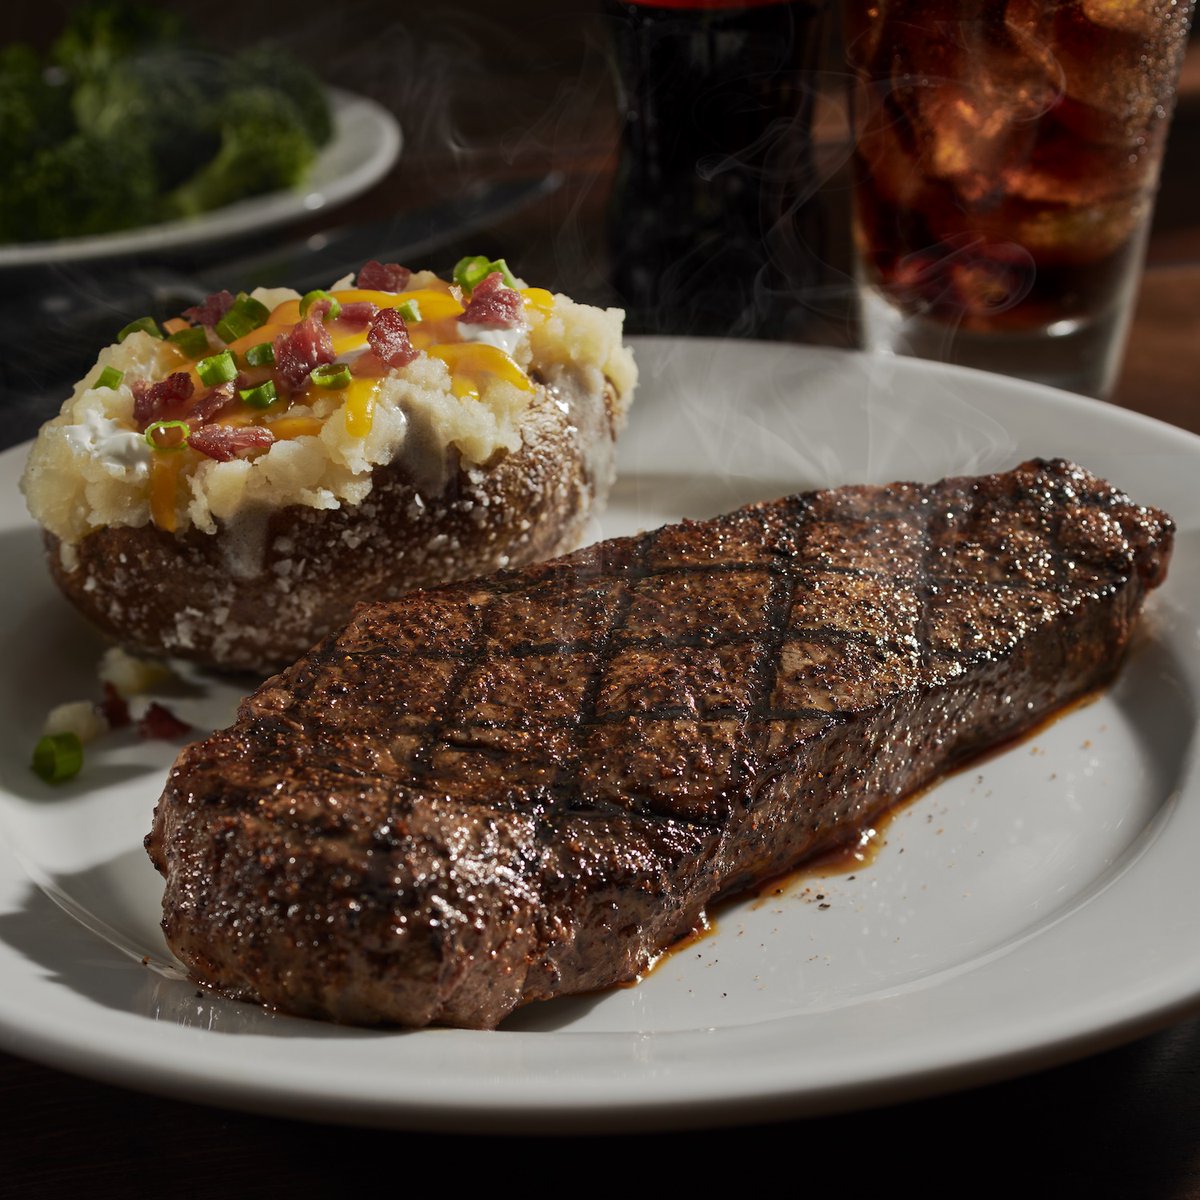 Handling life's challenges, one steak at a time.